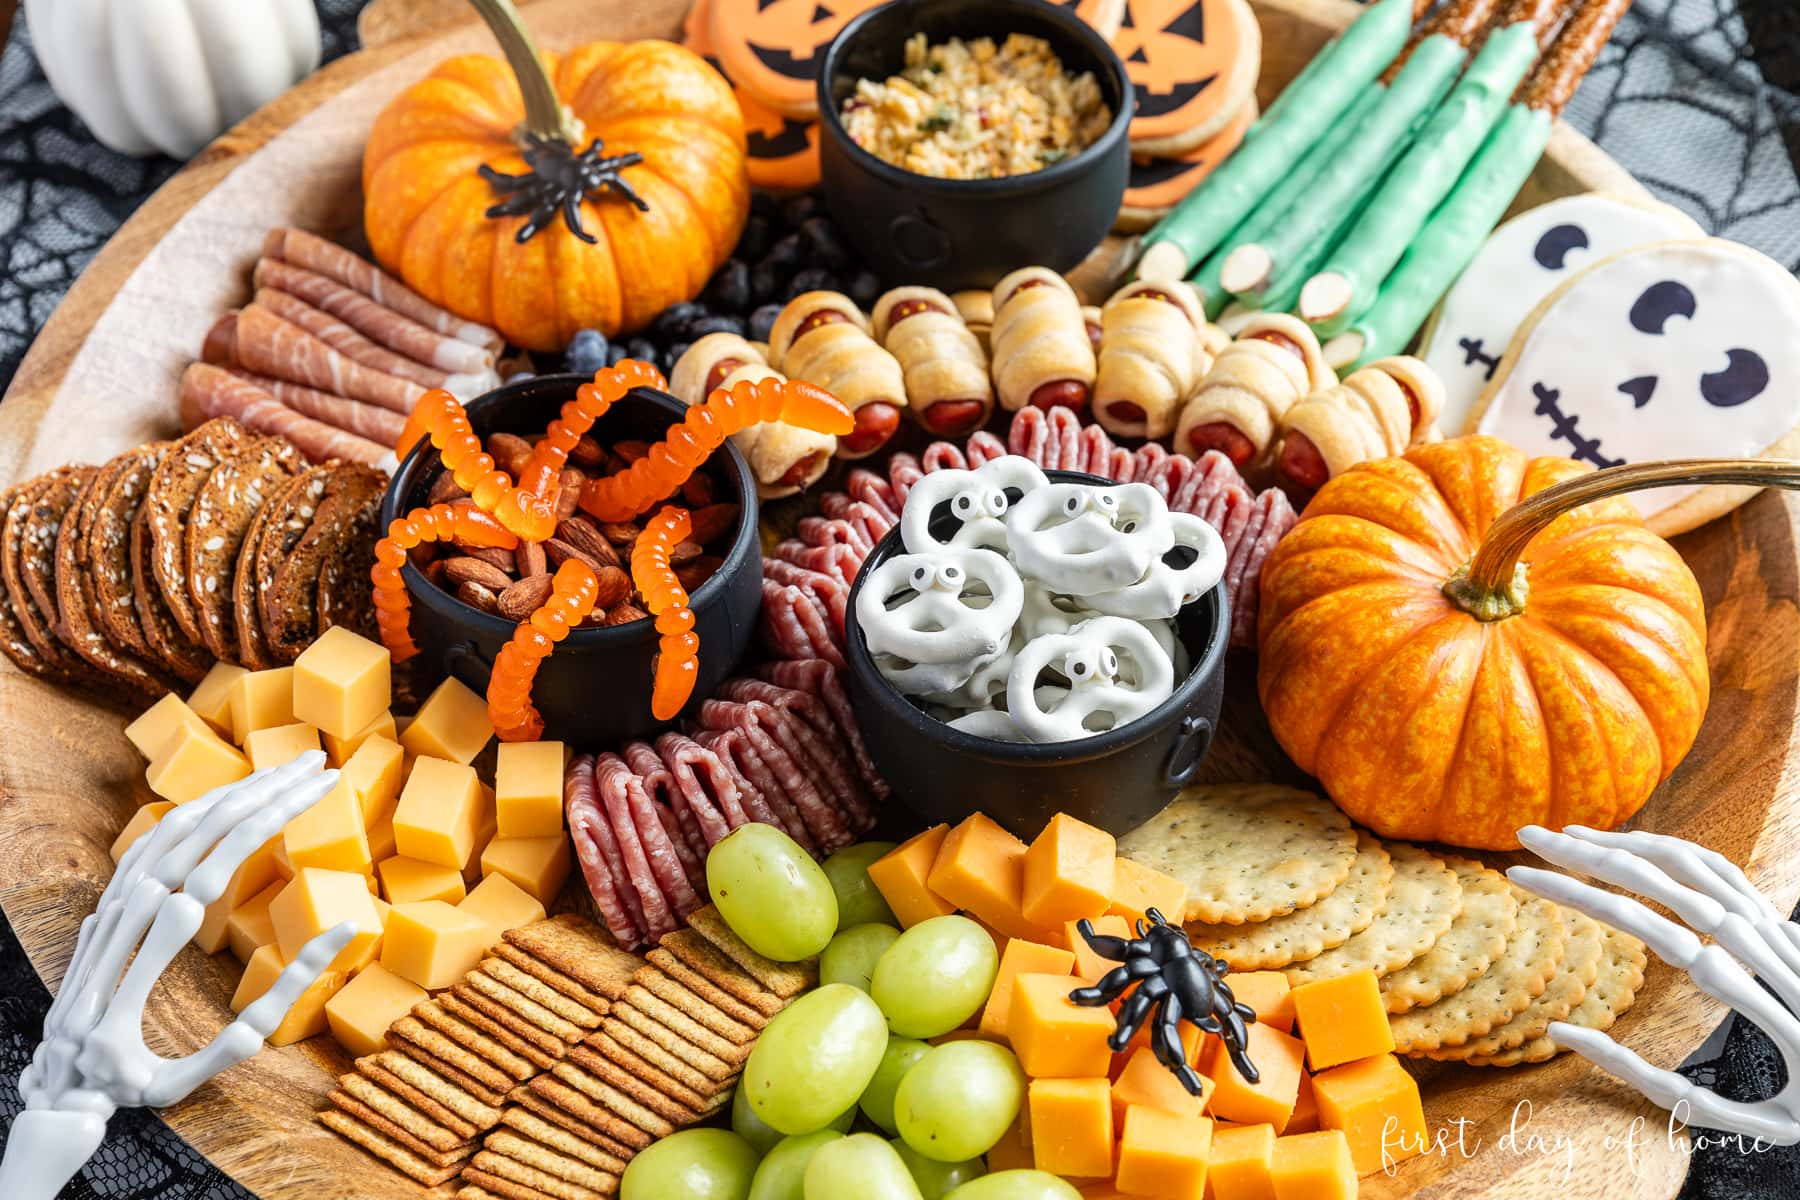 Halloween snacks on charcuterie board, including yogurt pretzels, grapes, crackers, gummy worms, cheese, and pigs in a blanket.